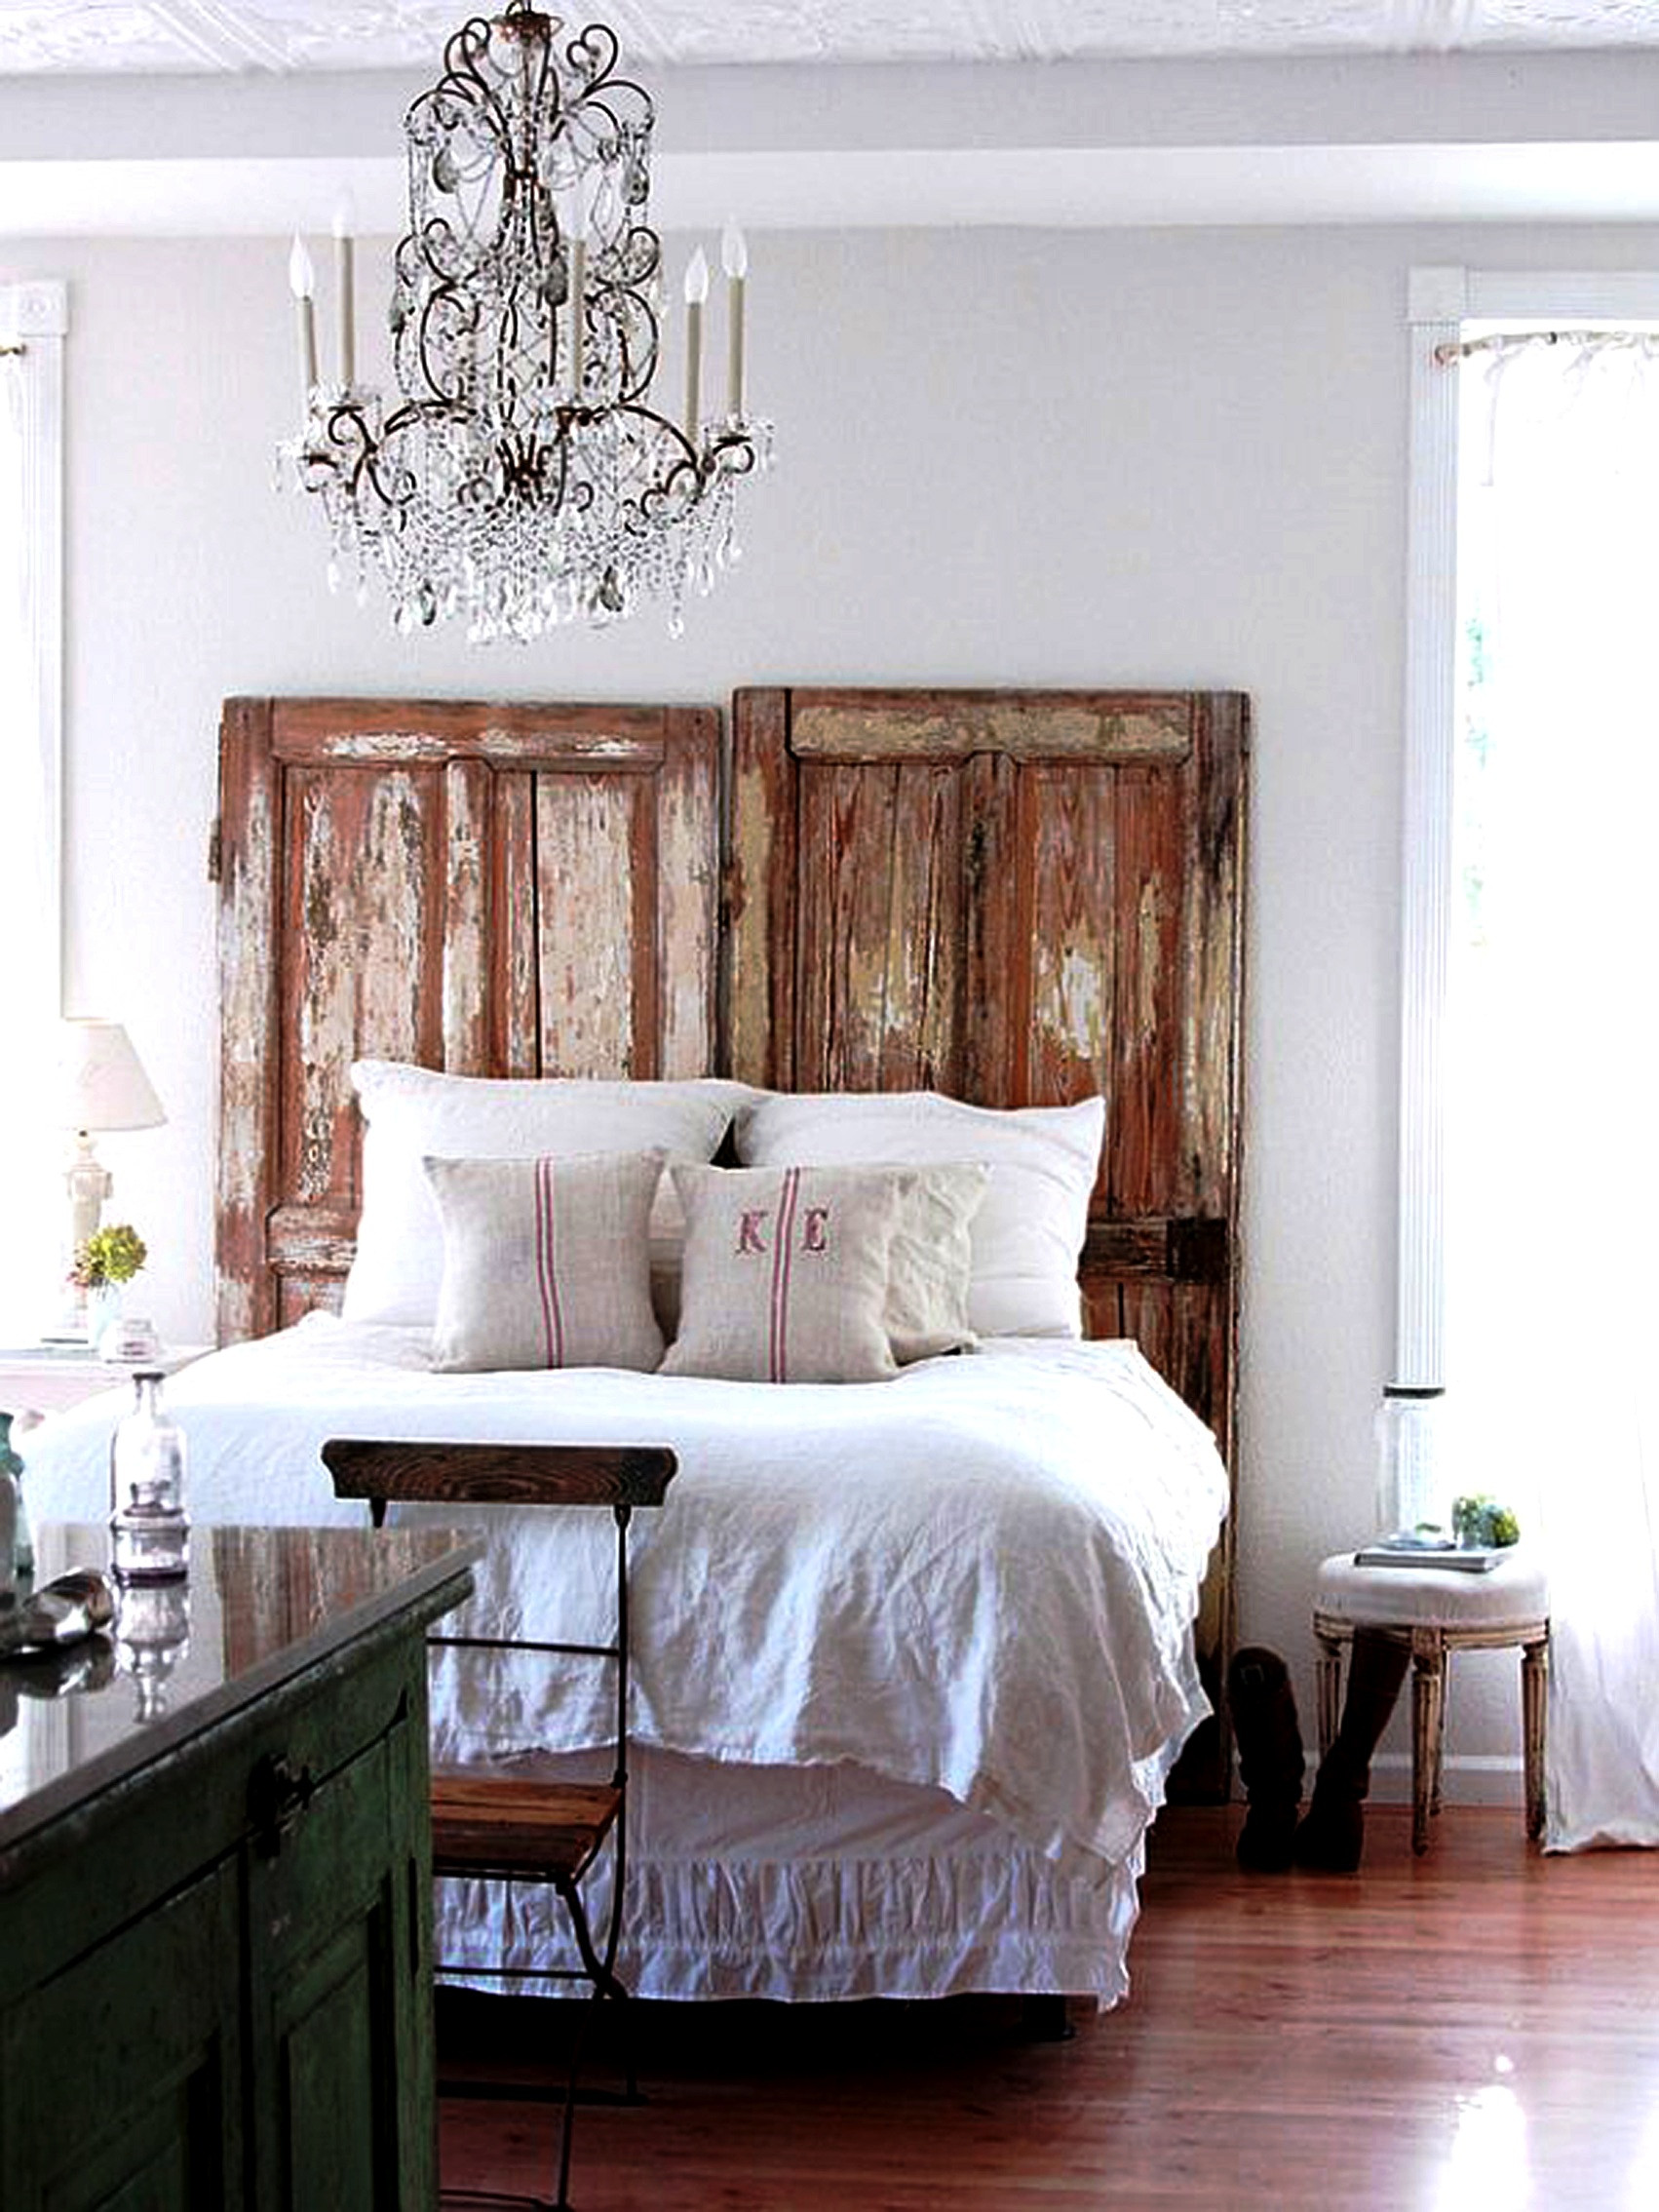 Rustic Bedroom Curtains
 Rustic Chic Home Decor Ideas – You Bet Your Pierogi